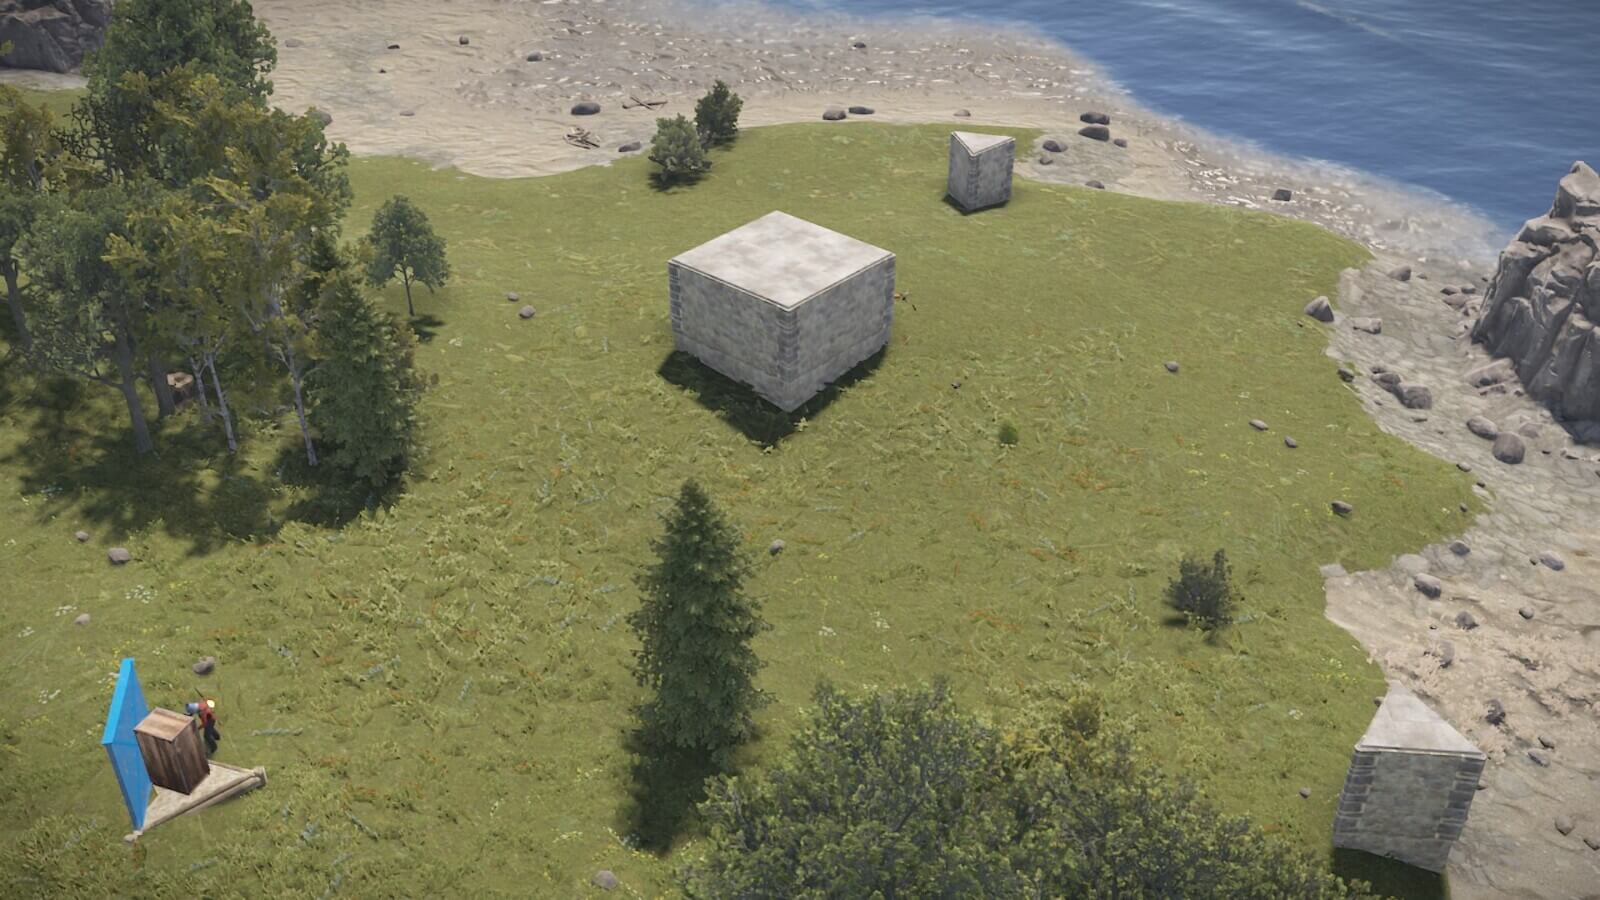 Example of a player utilizing external tool cupboards to claim a larger area of land for a potential compound.